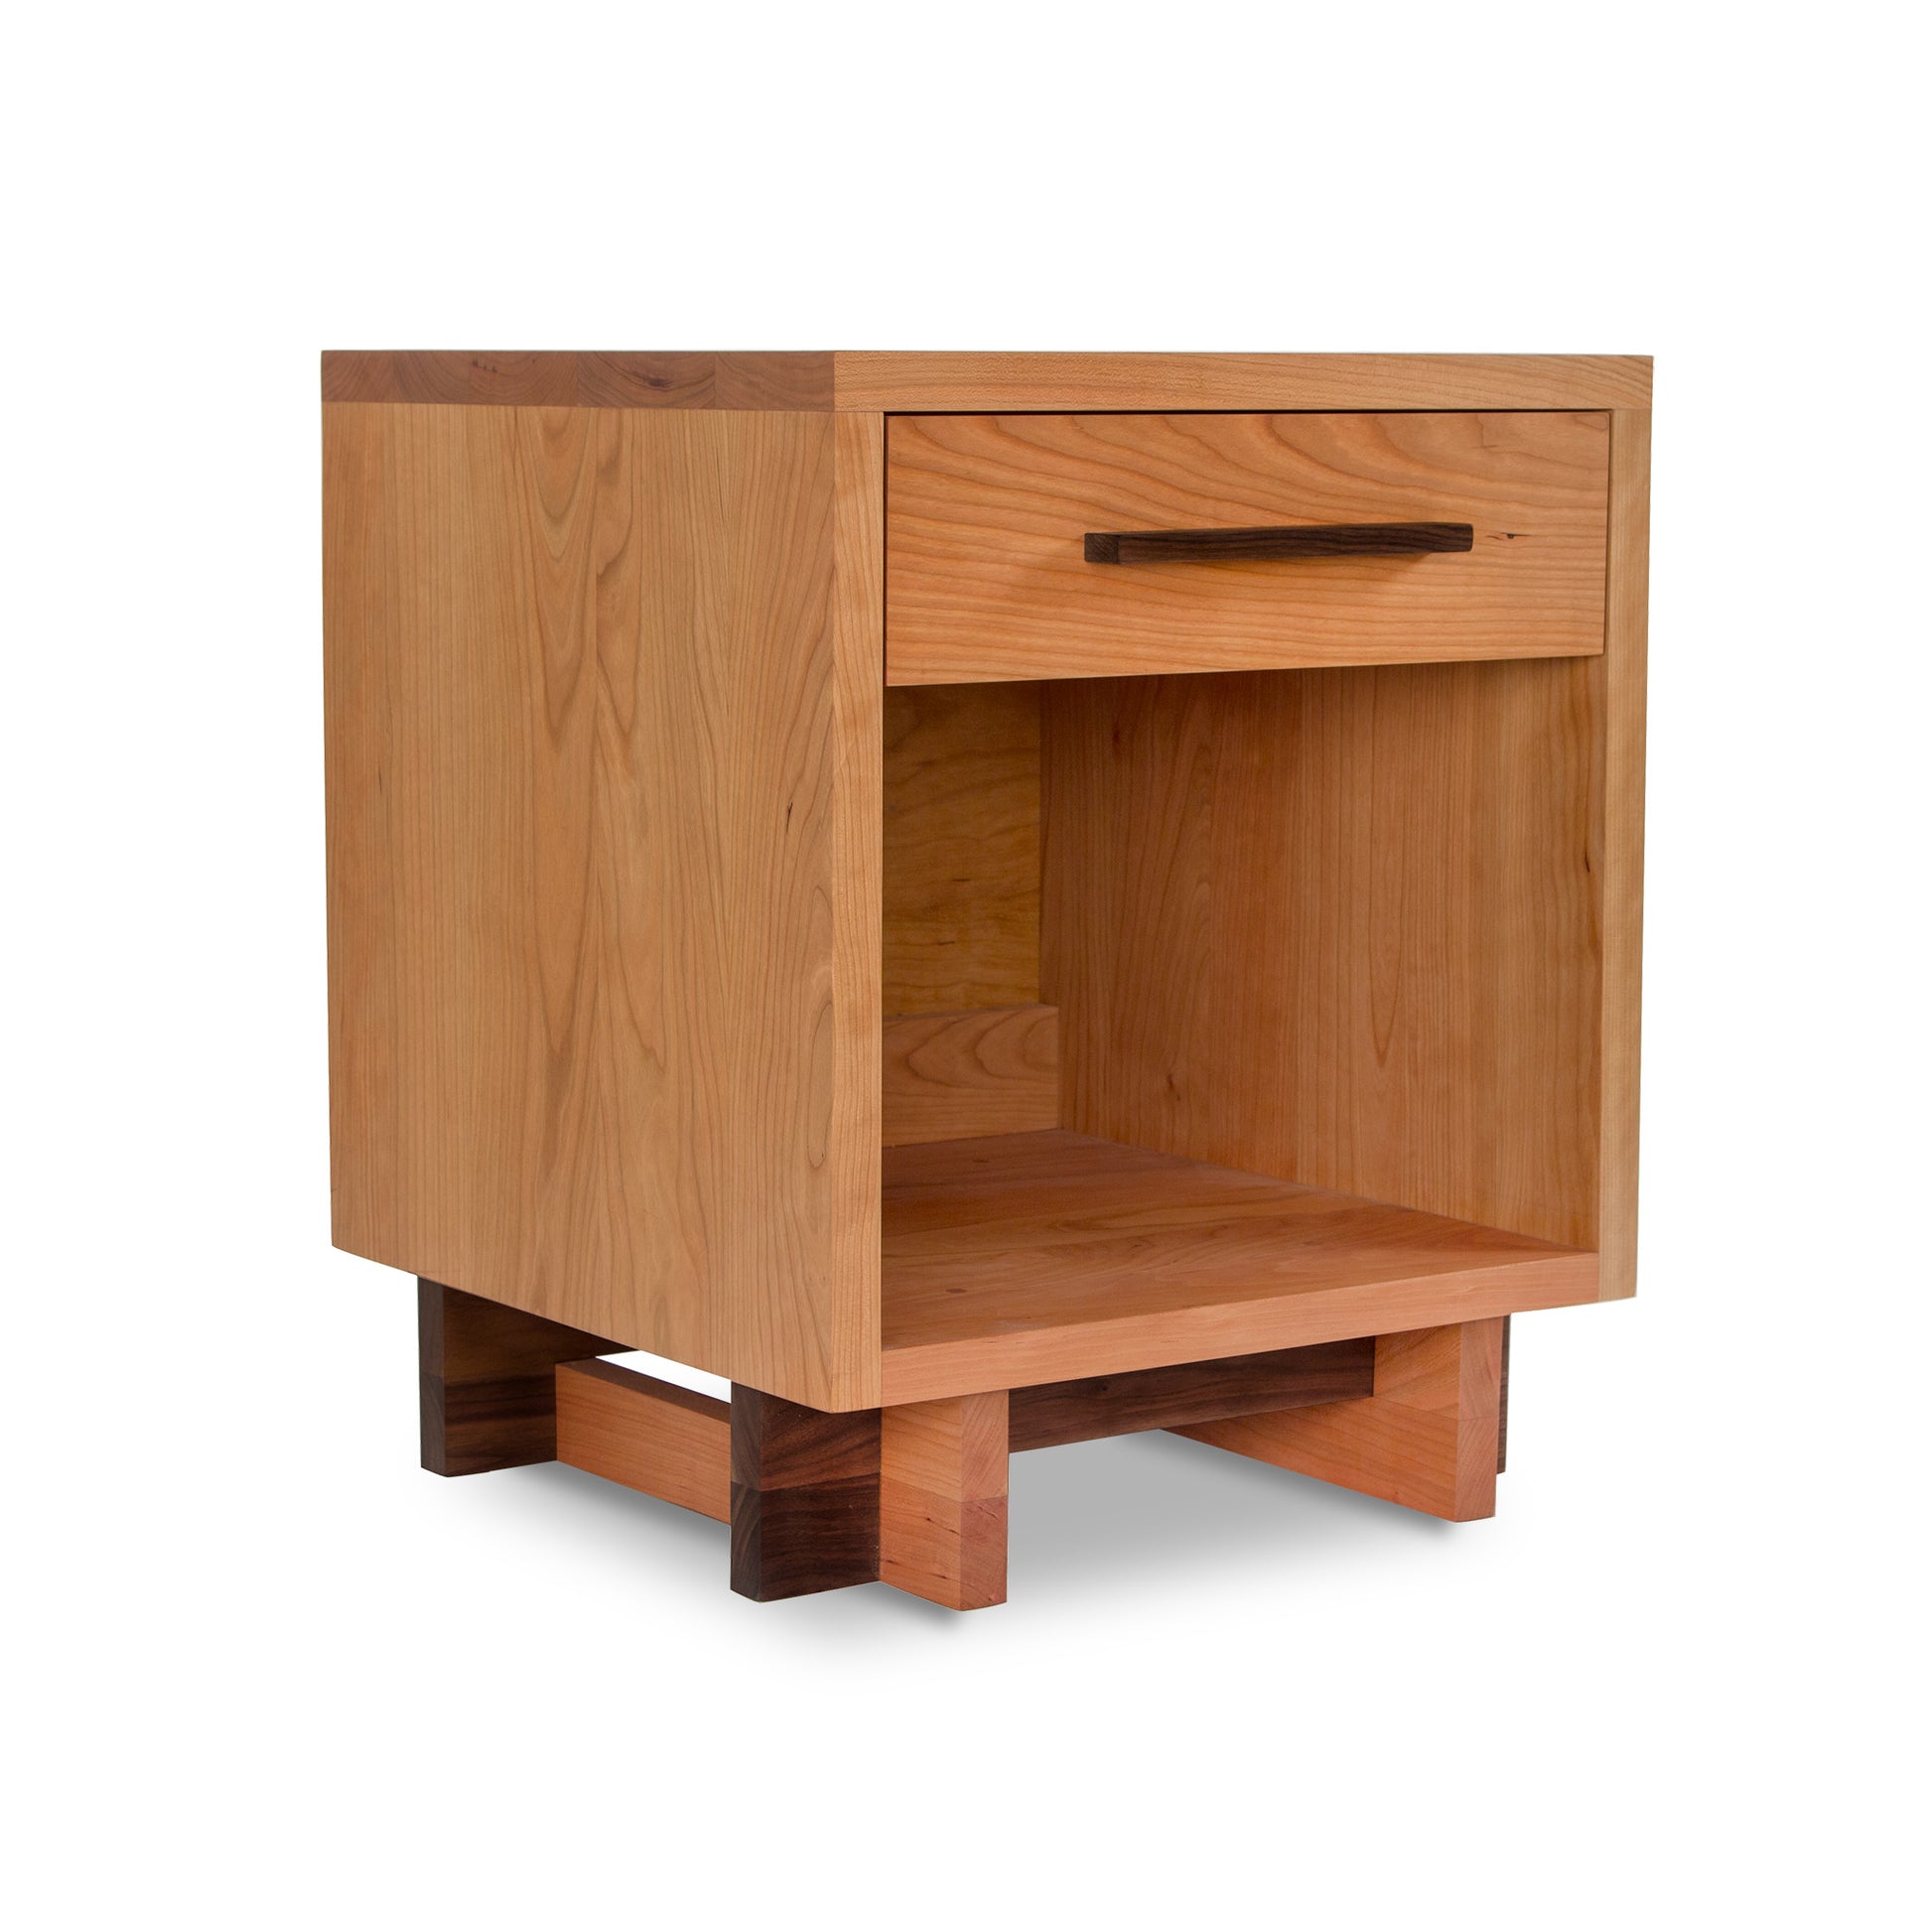 A Modern American 1-Drawer Enclosed Shelf Nightstand by Vermont Furniture Designs, featuring a single drawer with a horizontal handle and an open lower shelf, set against a white background.